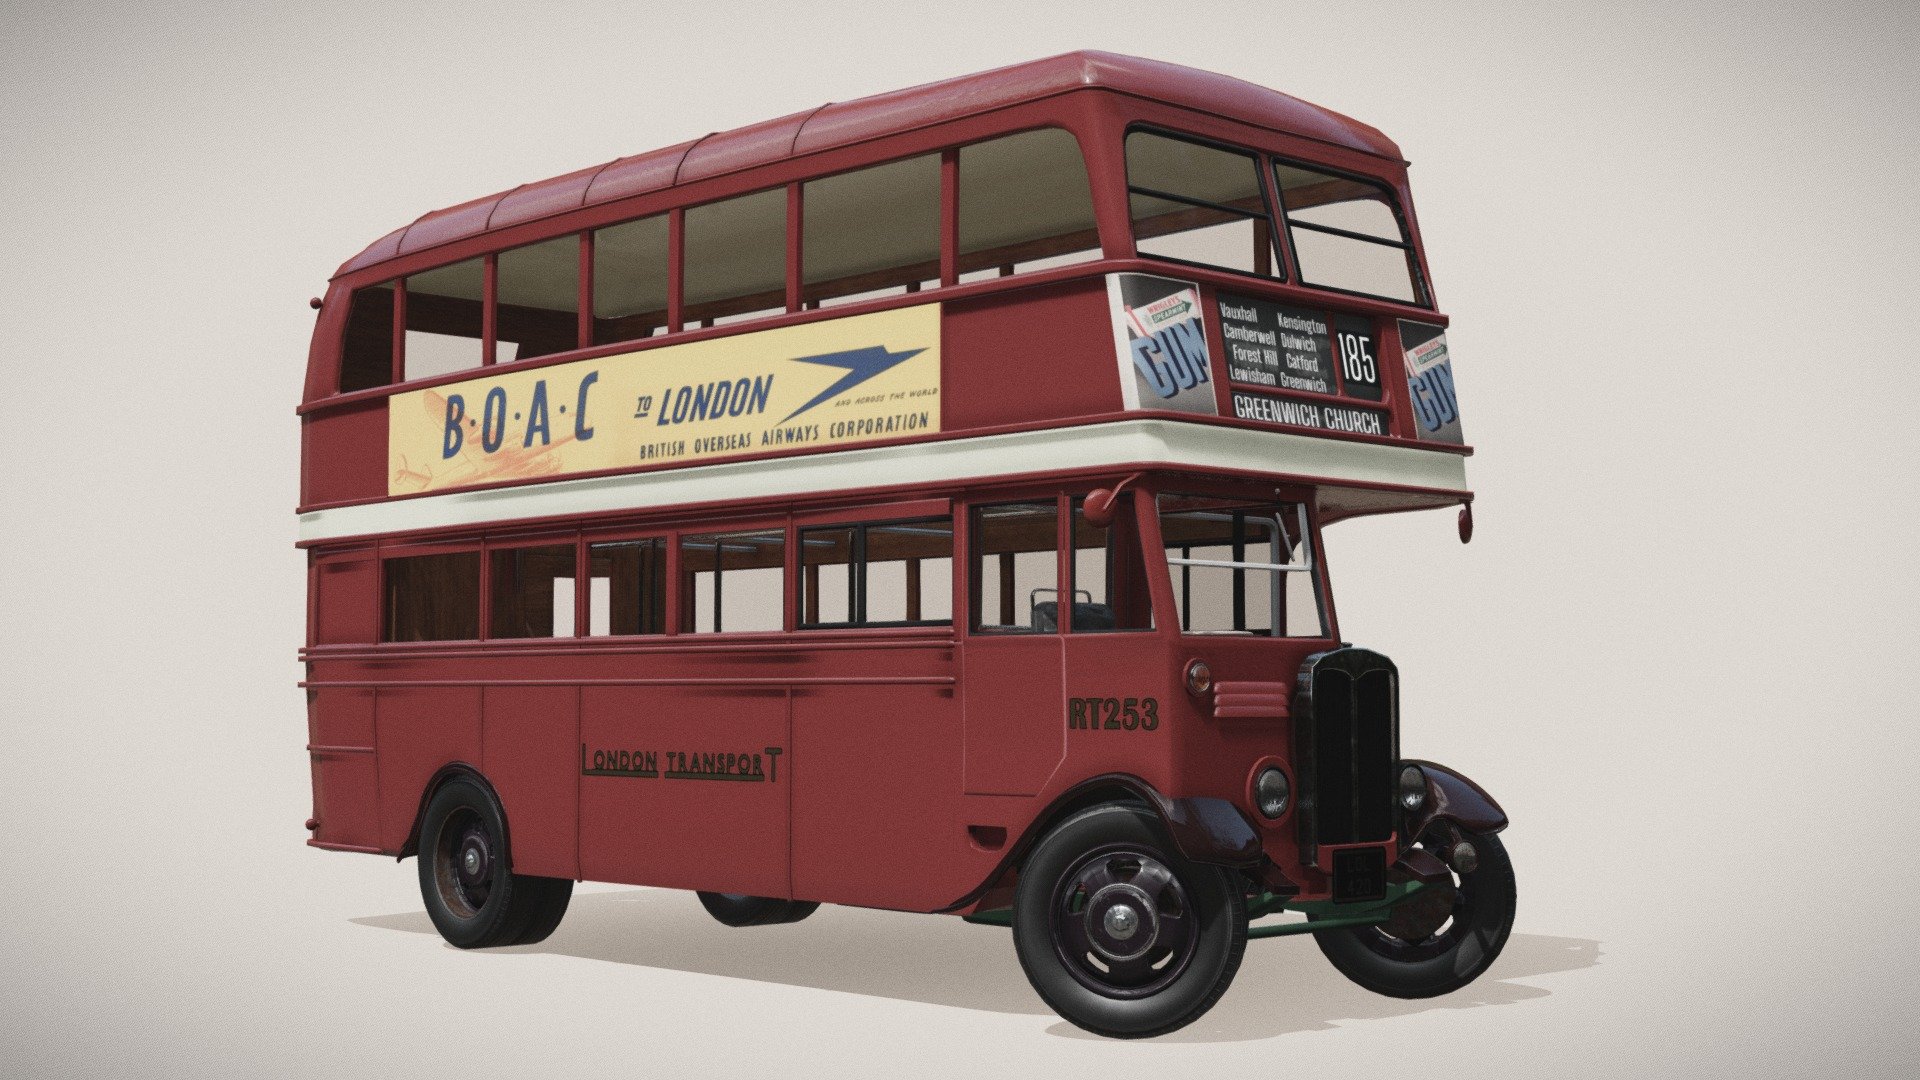 A 1930s London AEC Regent look-alike bus model, under 100k tris. Textures easily editable, great as a background prop or you can rig it and use it in interactive or animation projects. Made in Blender, textures made in Sketchbook Pro 3d model